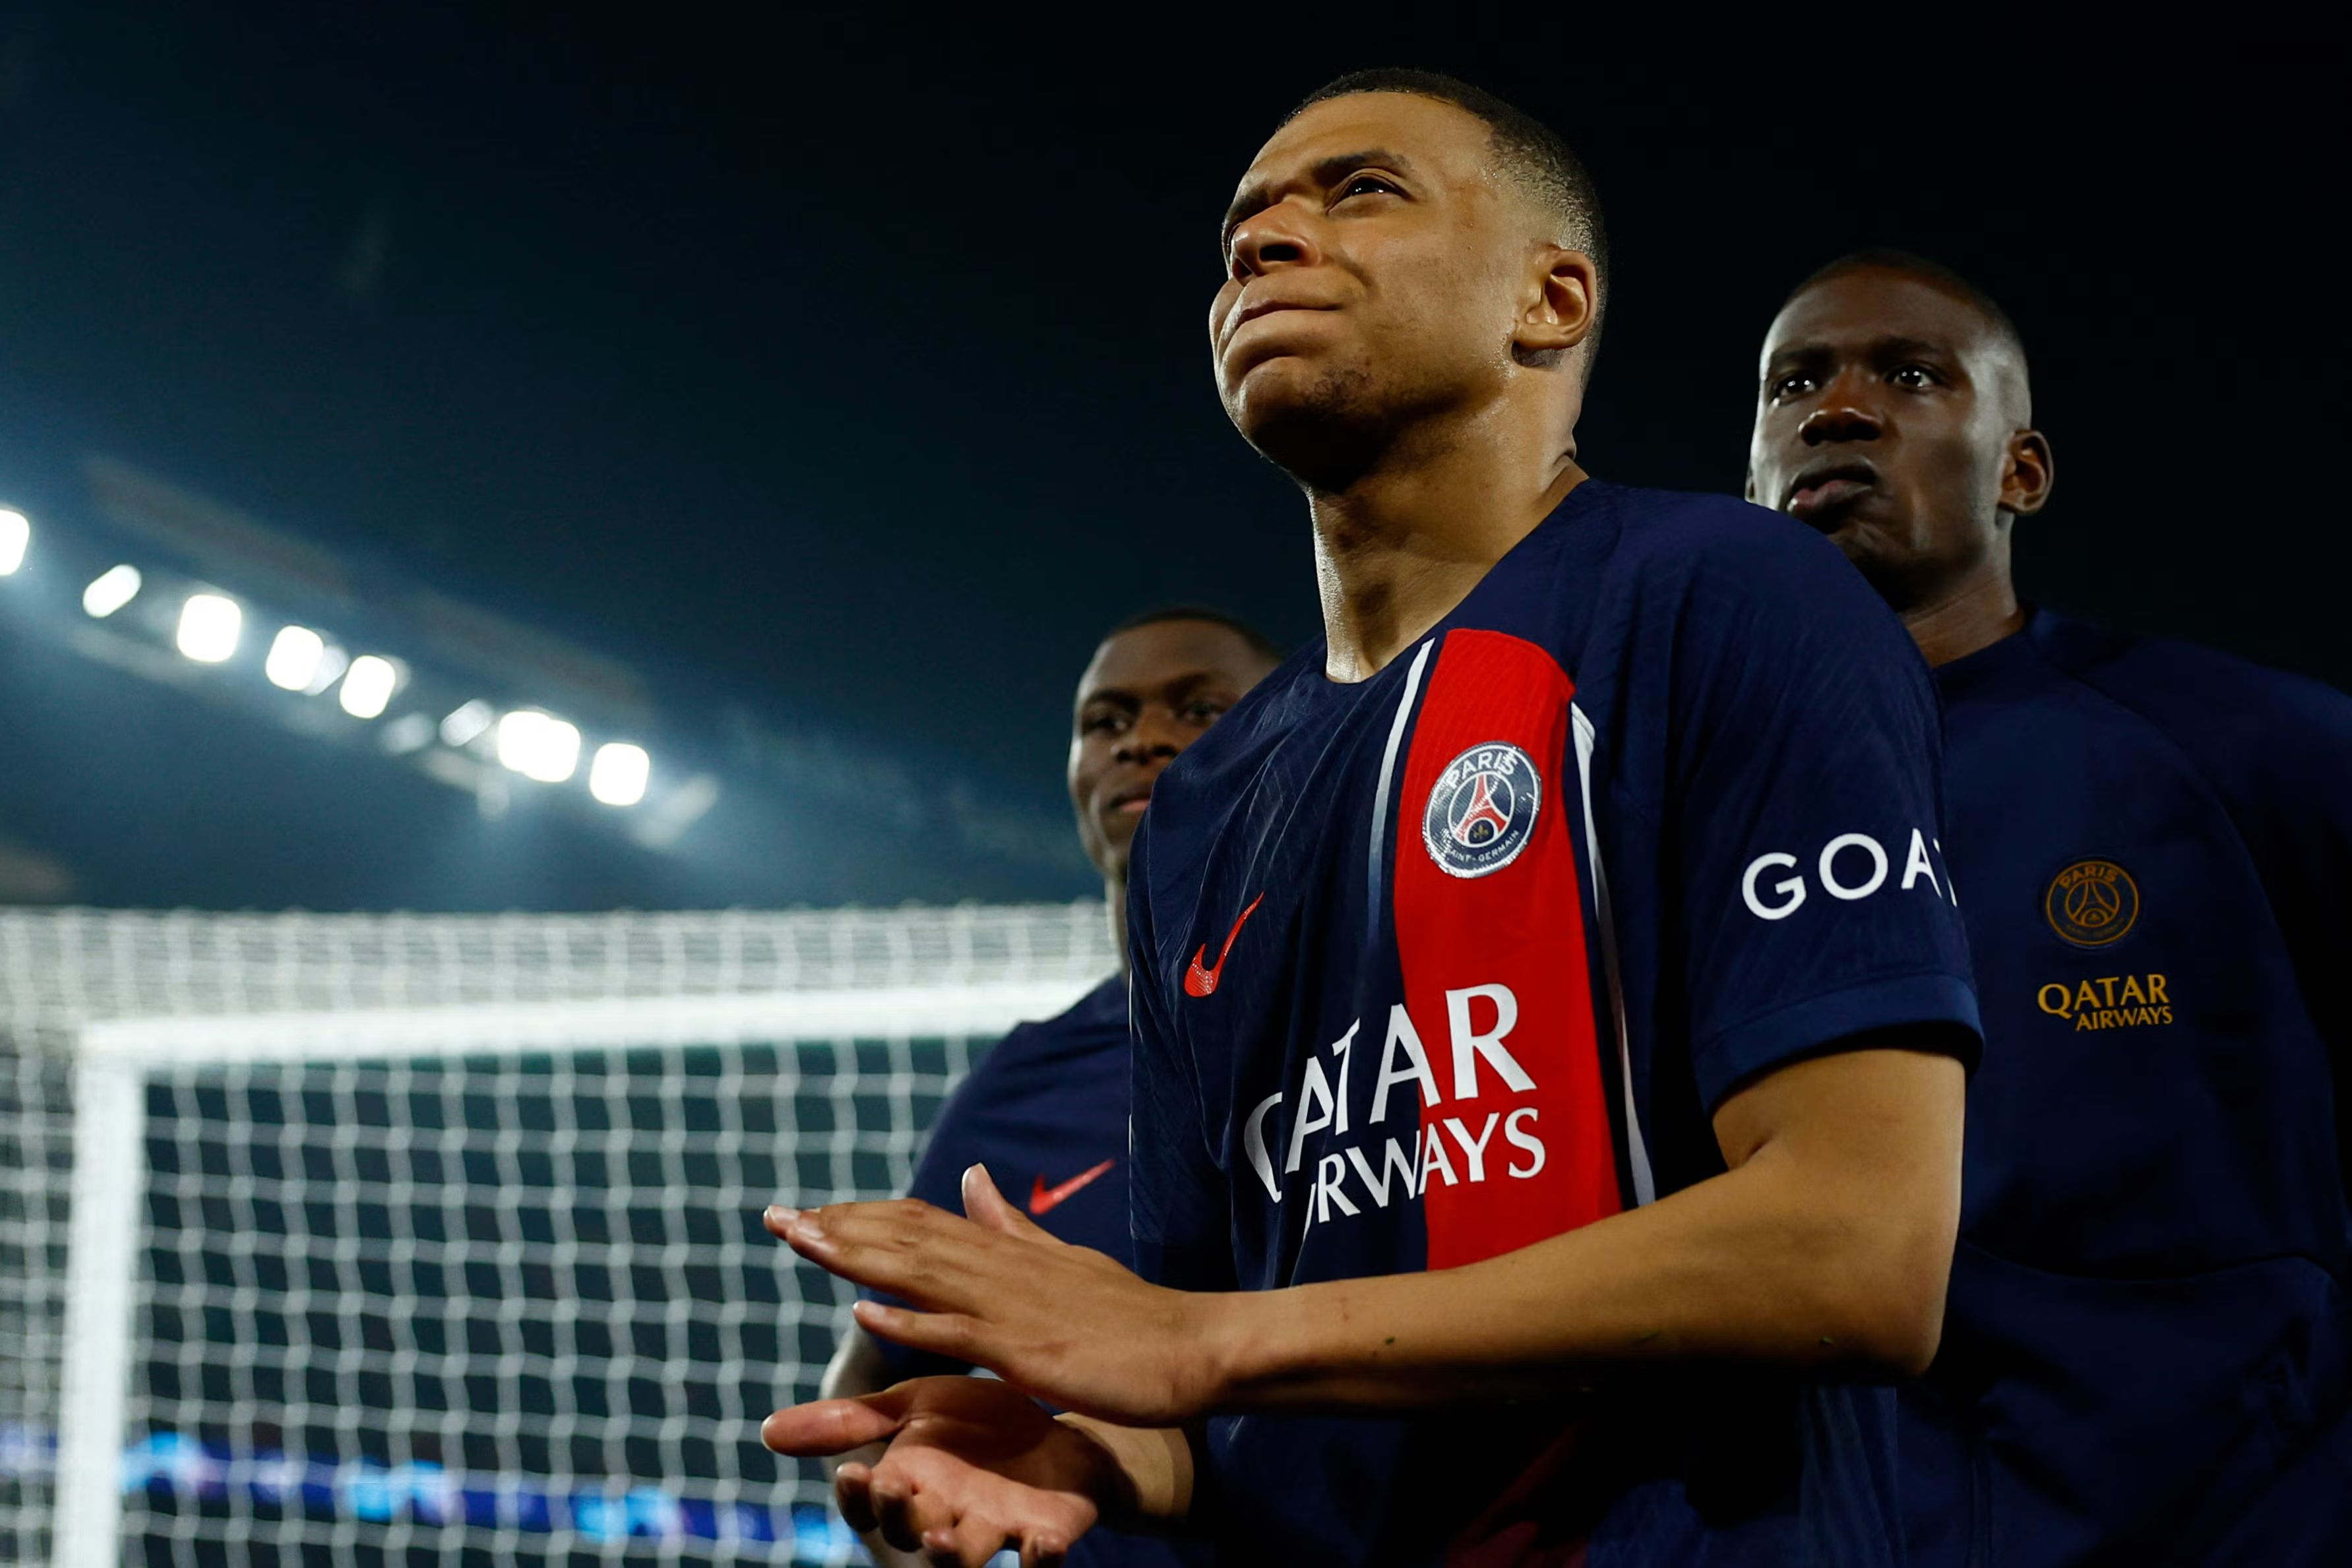 EXCL: ‘Kylian Mbappe will leave PSG as their greatest scorer, but not their best player’ – Emmanuel Petit